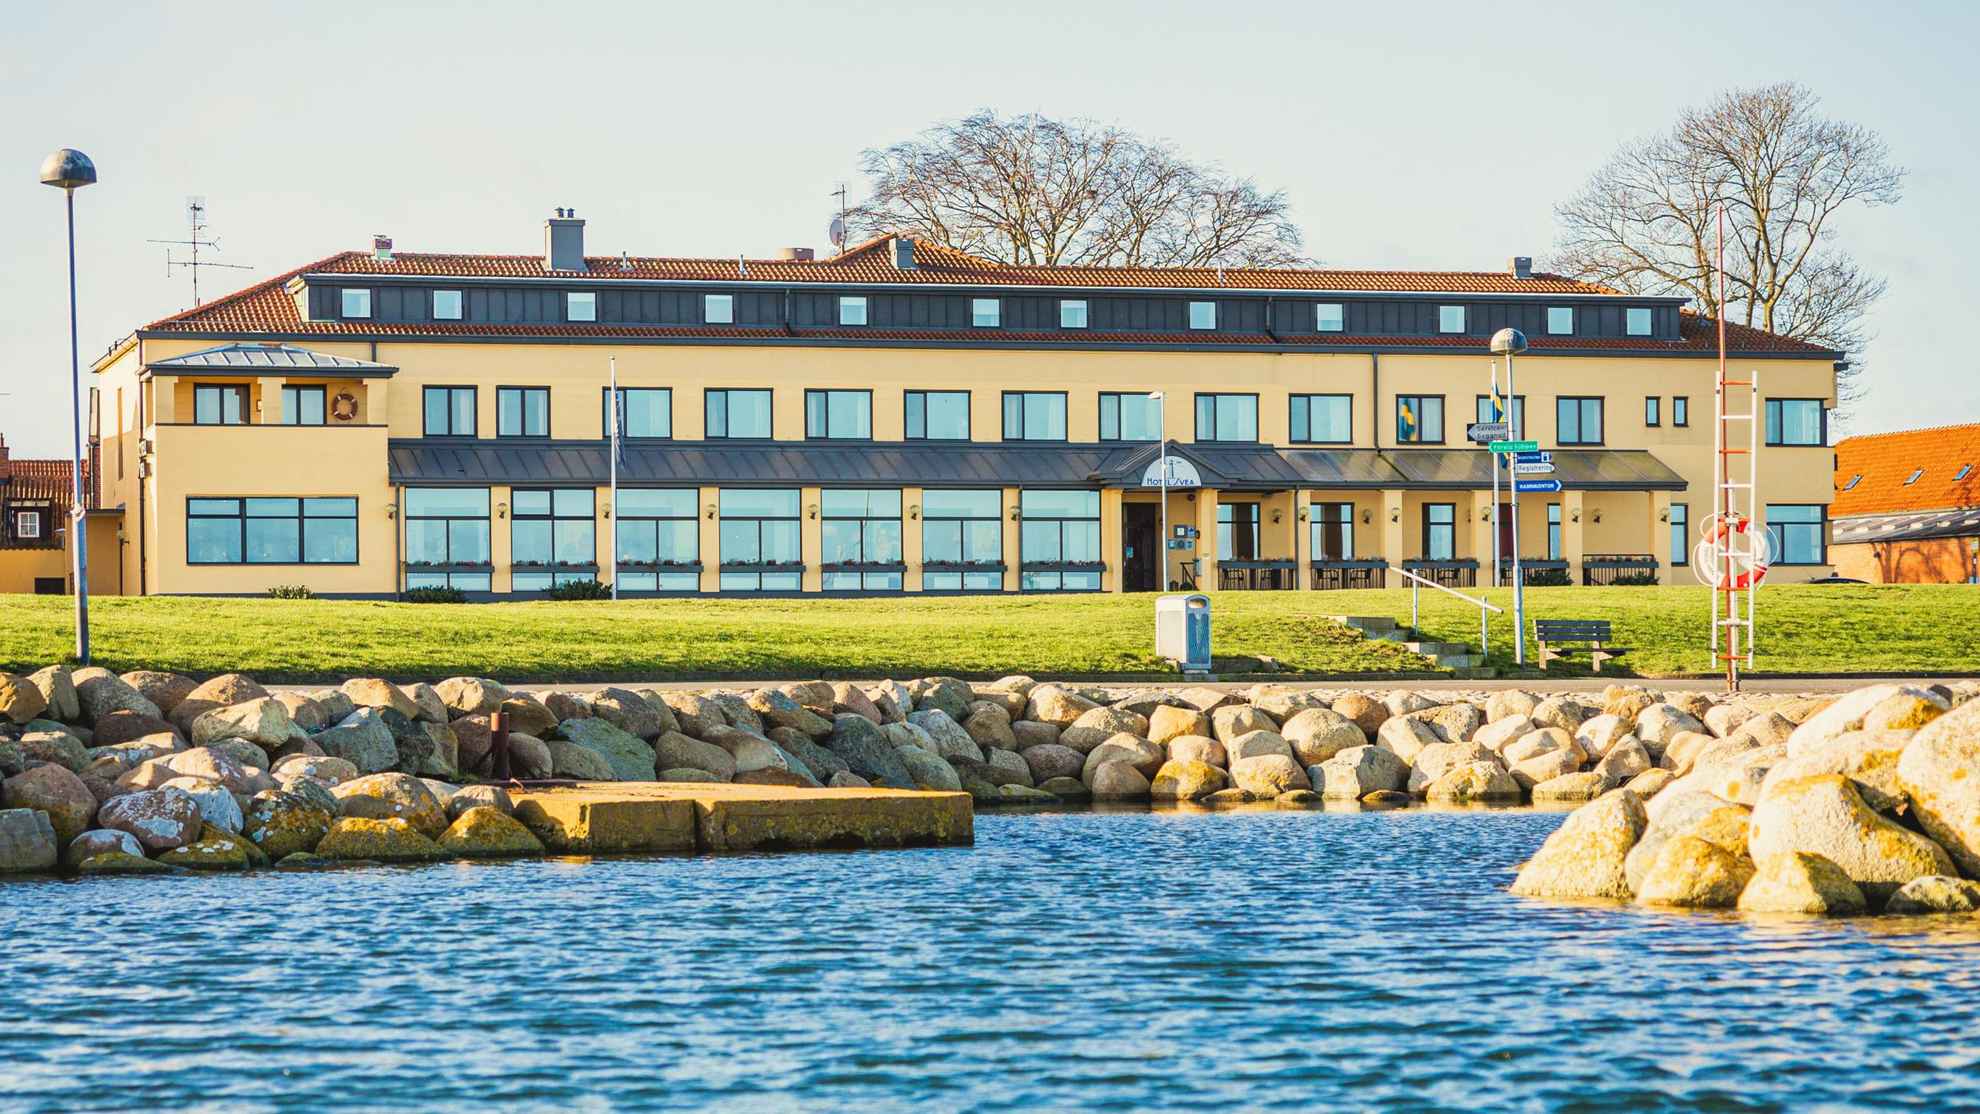 Exterior of Hotel Svea in Simrishamn, Skåne, on a sunny spring day. The yellow building is located by the water.